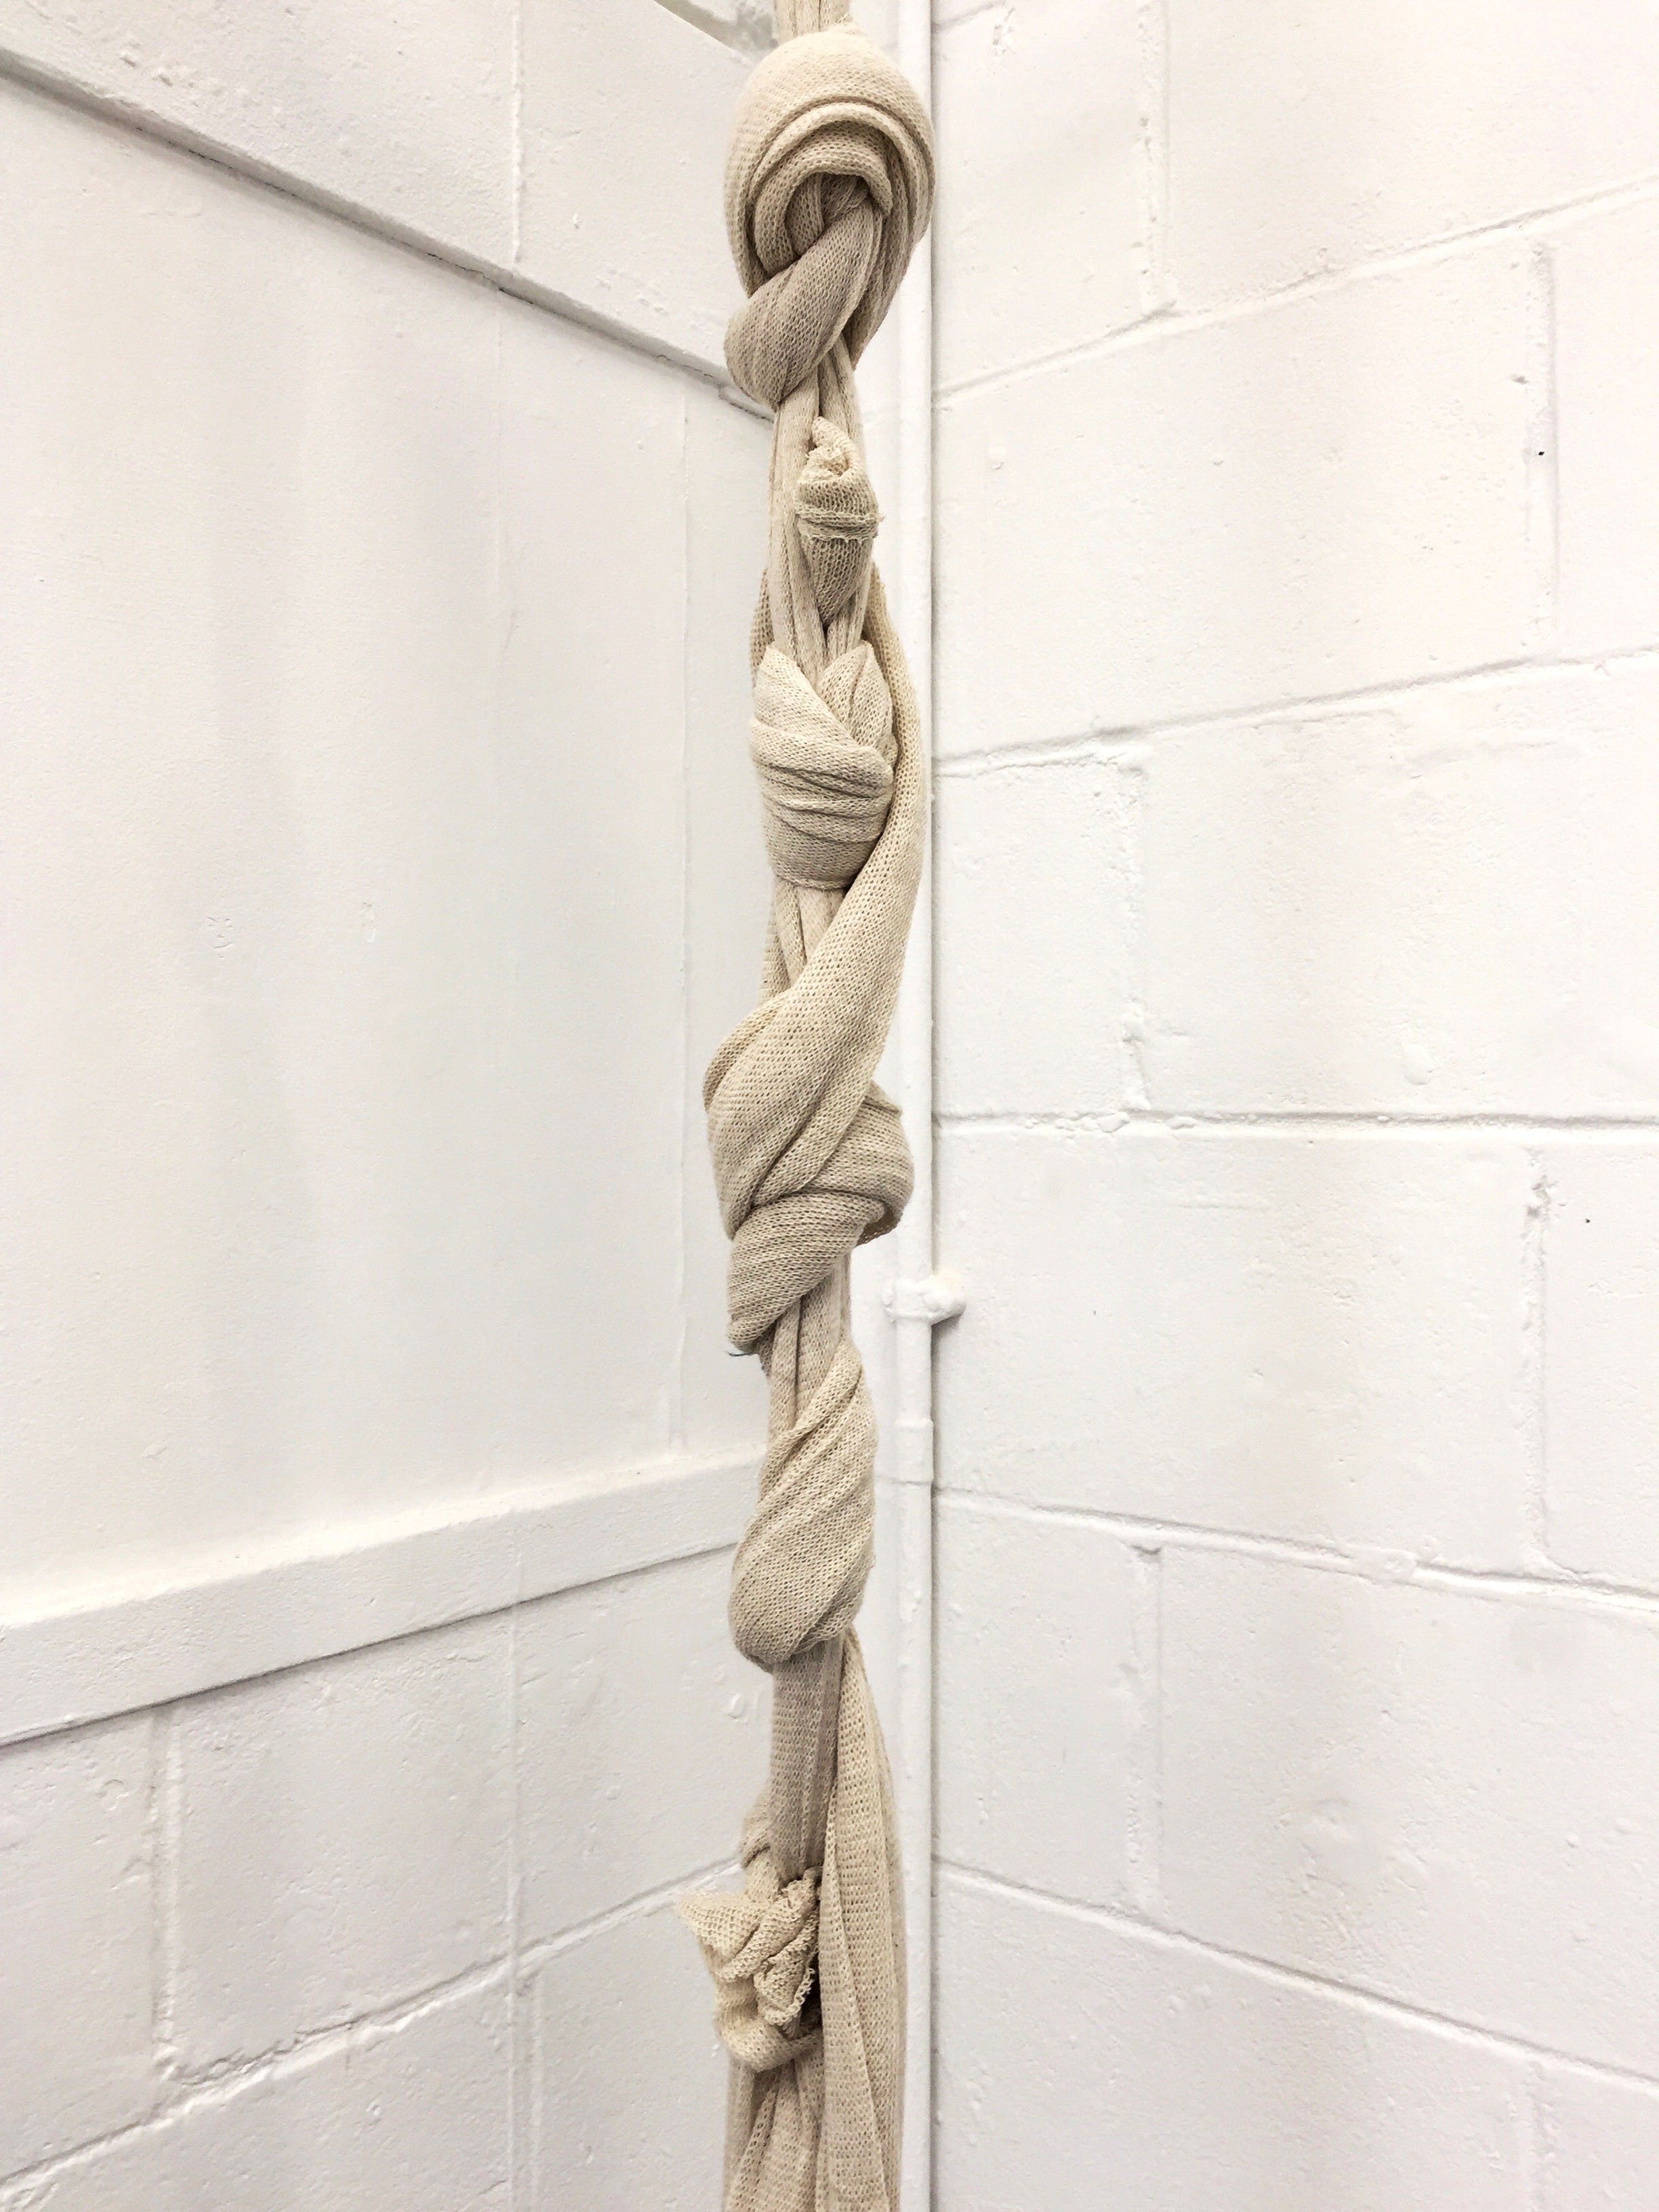   Fully in Bloom,  2018, Steel frame, air dry clay, wax, fabric.  